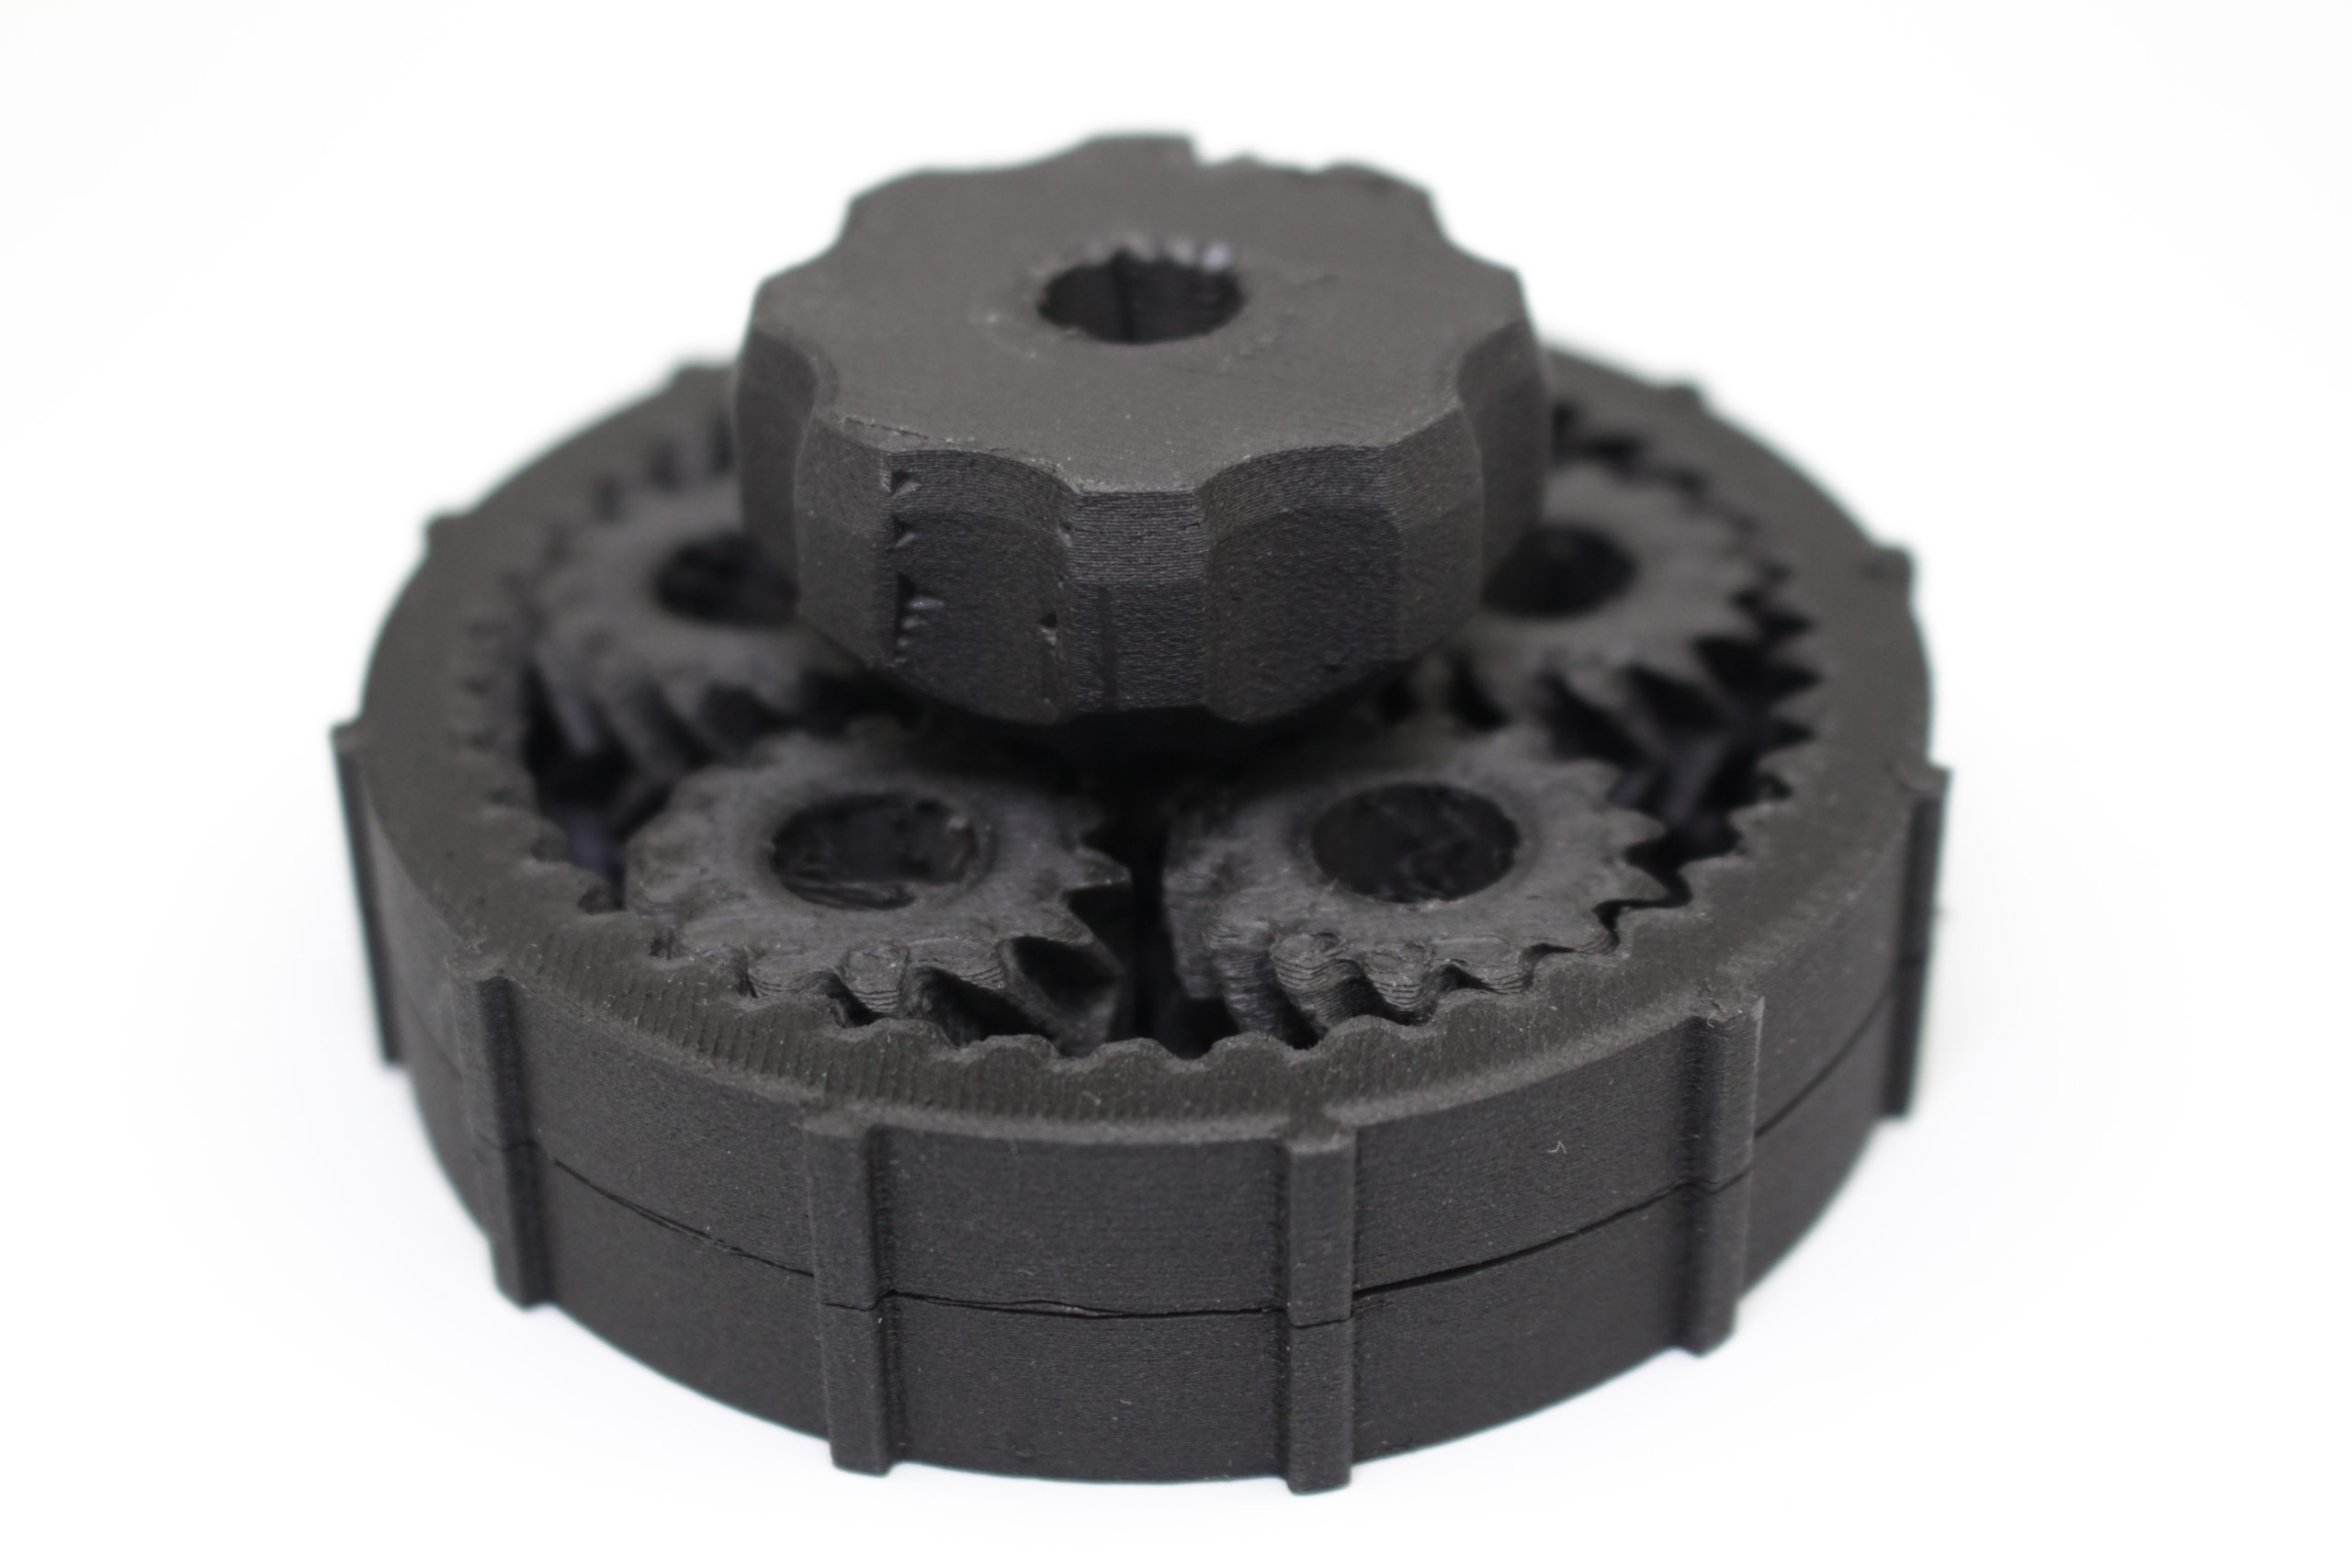 Planetary gear system. Photos by 3D Printing Industry.